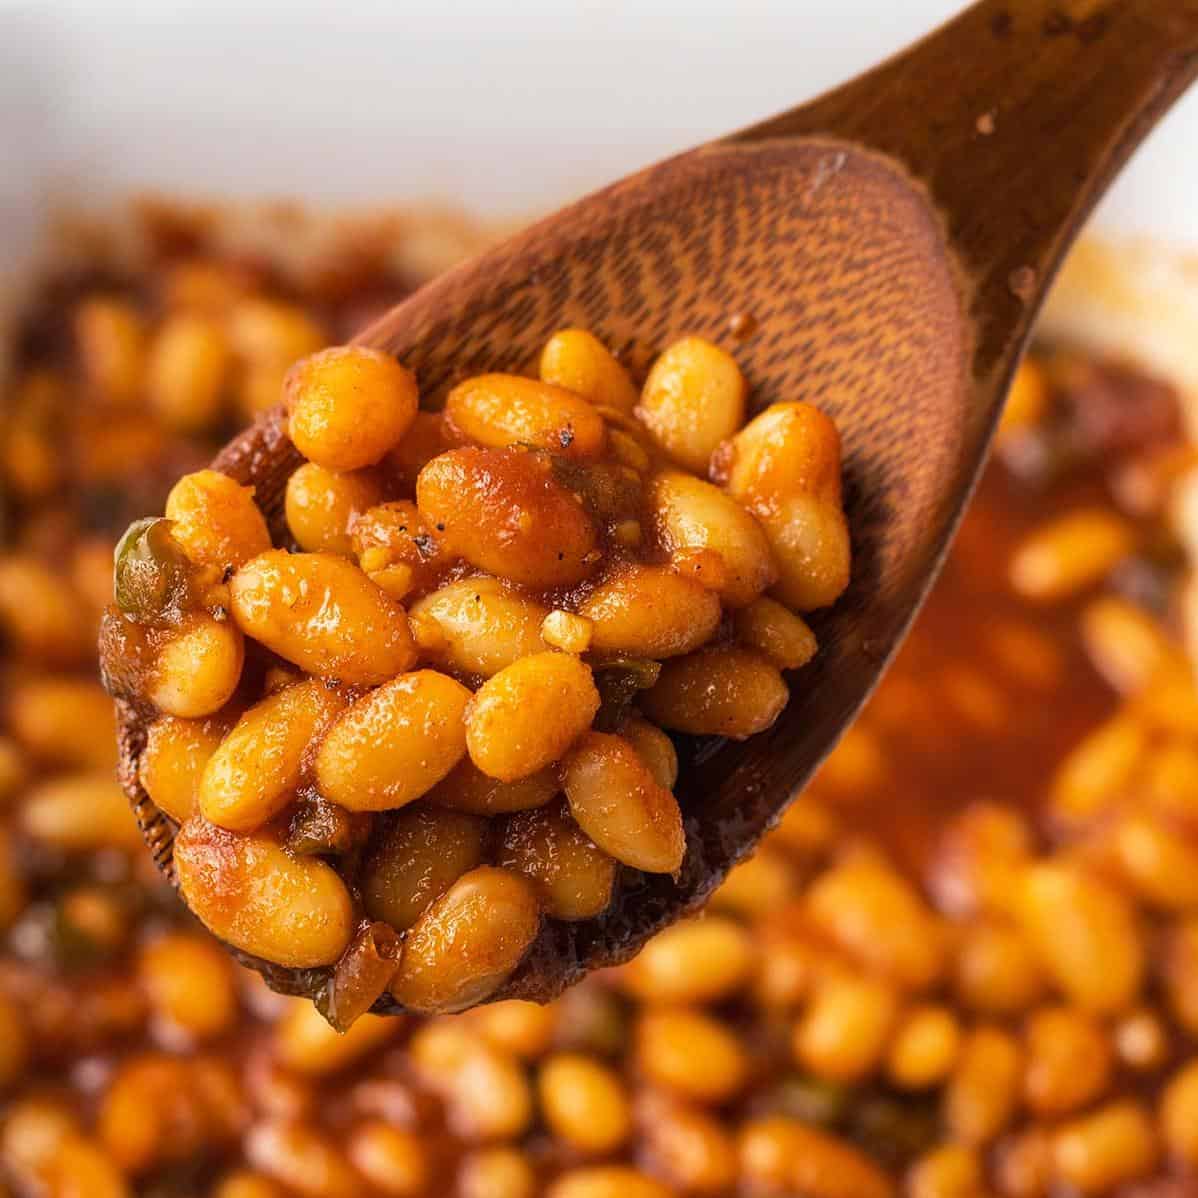  Say goodbye to canned baked beans and make your own, from scratch!